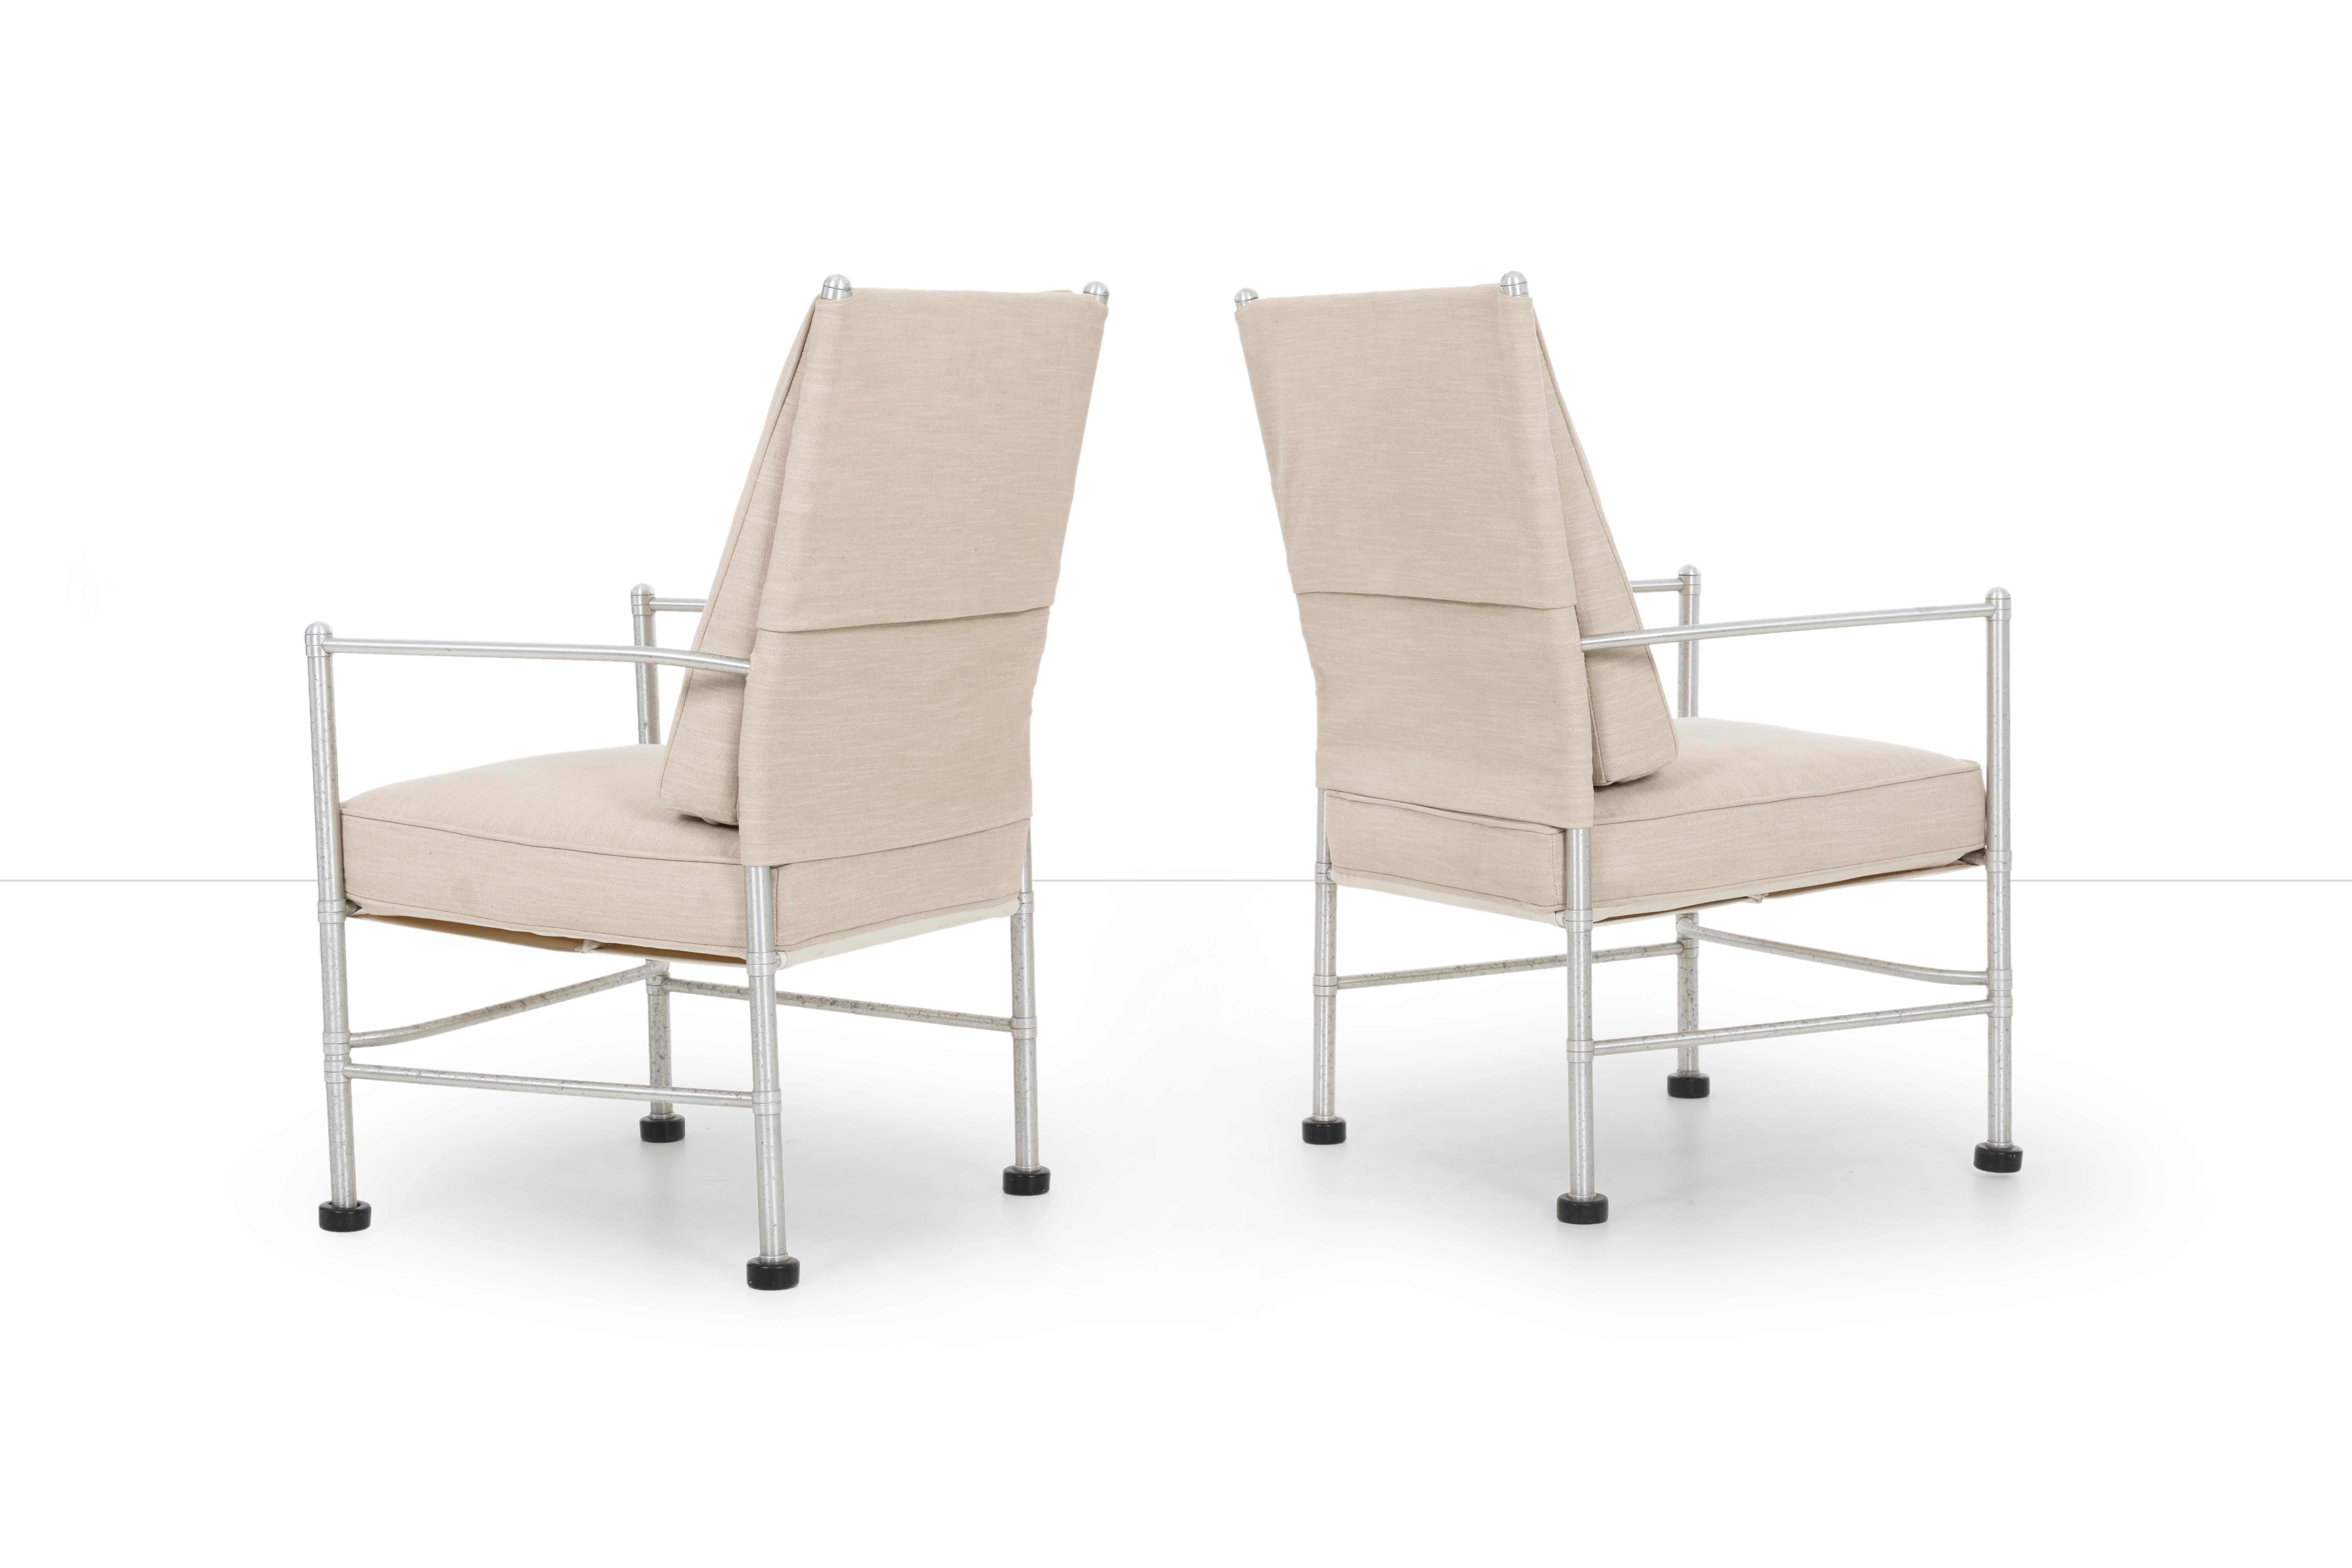 Mid-20th Century Pair of Warren McArthur Lounge Chairs For Sale